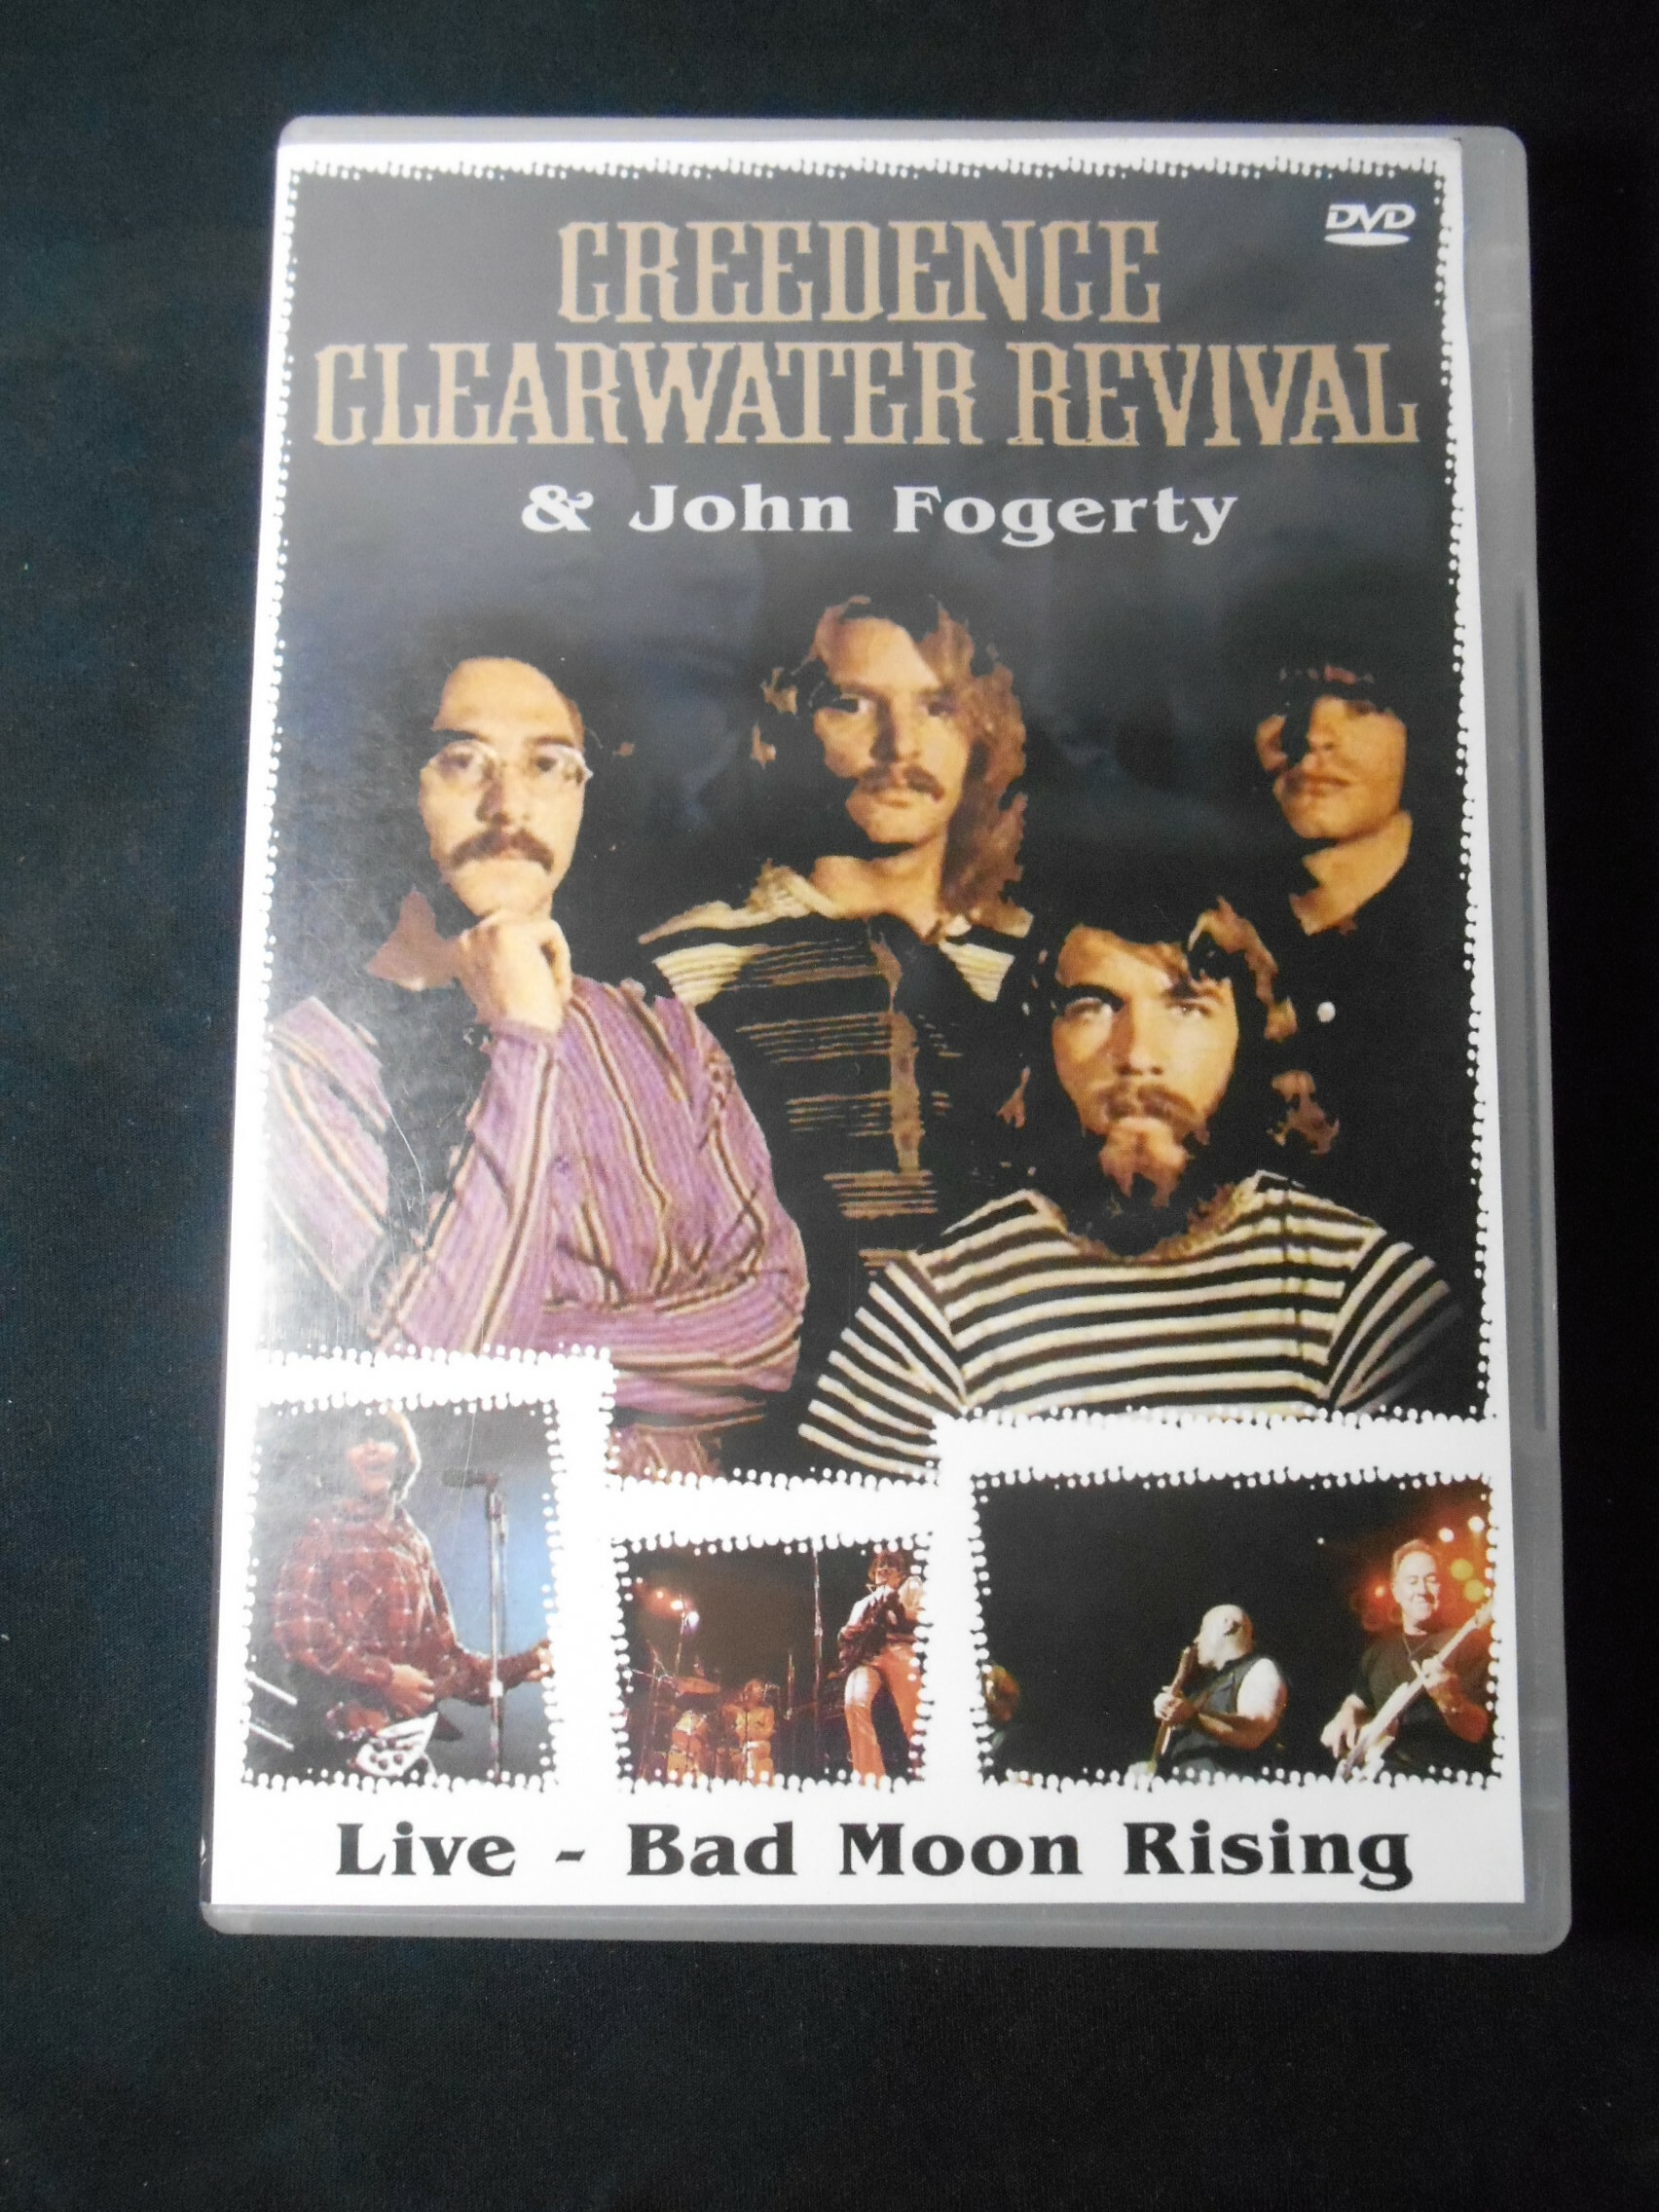 DVD - Creedence Clearwater Revival and John Fogerty - Live Bad Moon Rising